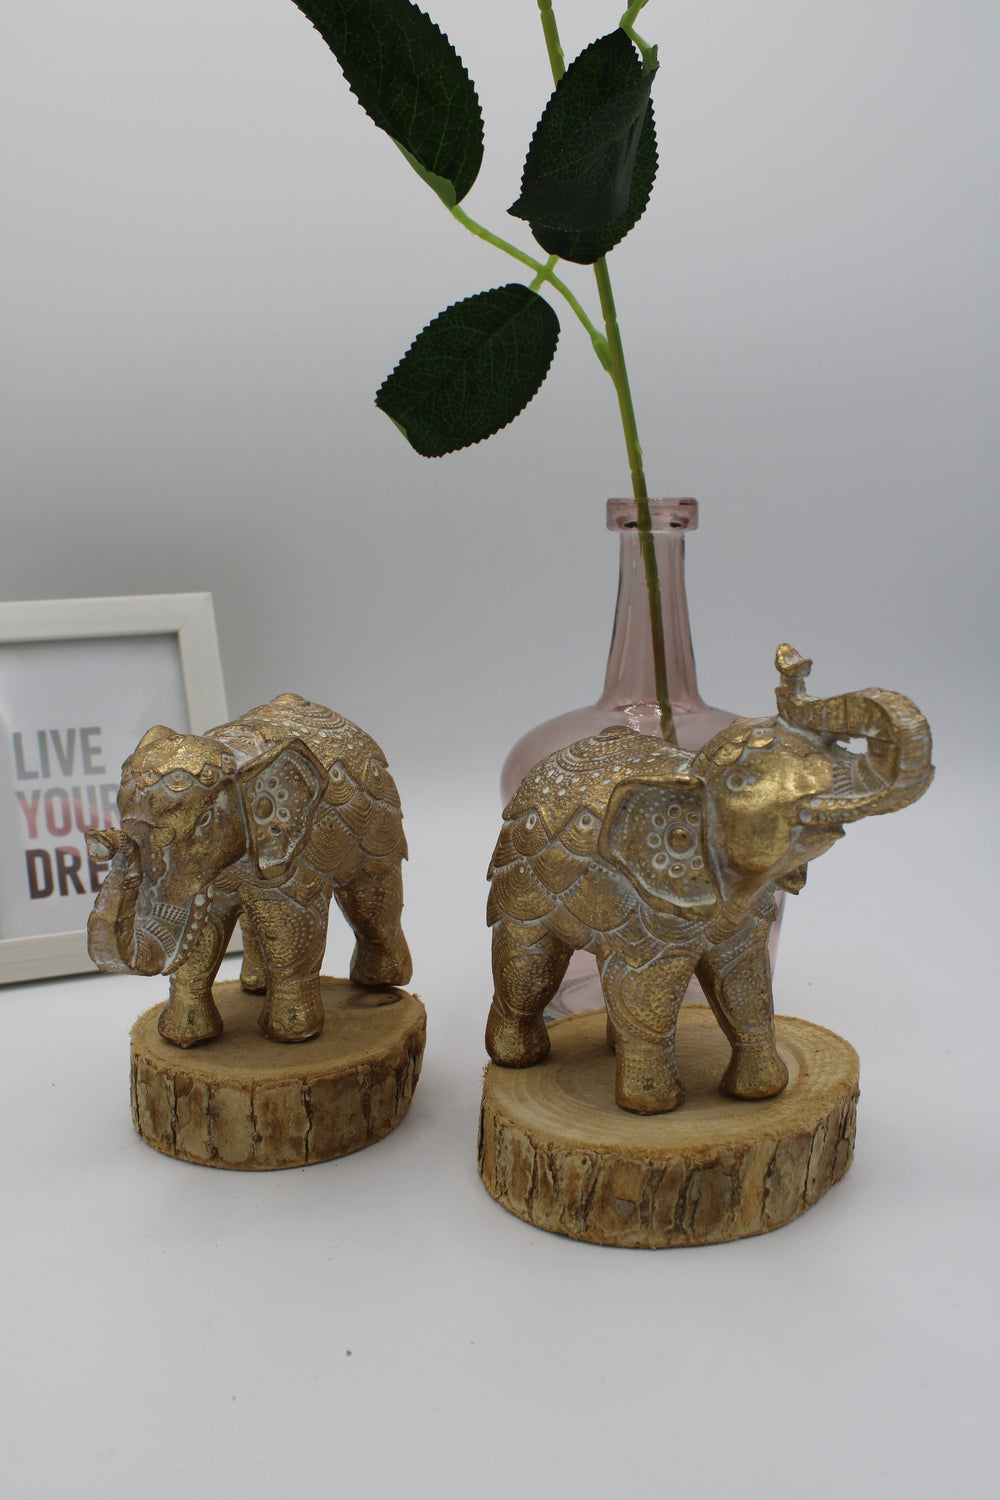 2 Standing elephant figurines in gold color